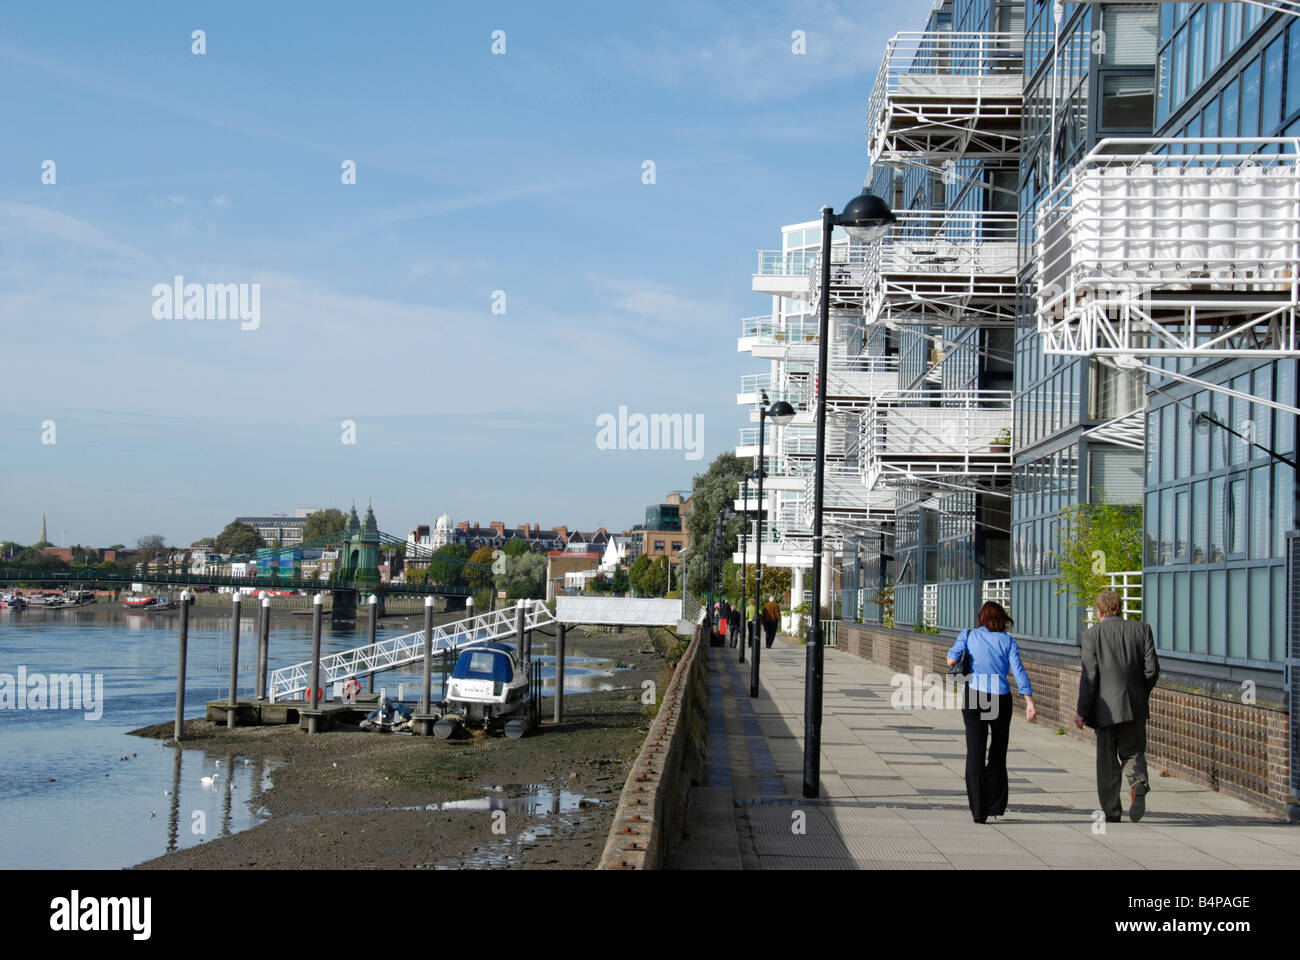 Thames Wharf residential development next to the river Thames Hammersmith London England Stock Photo